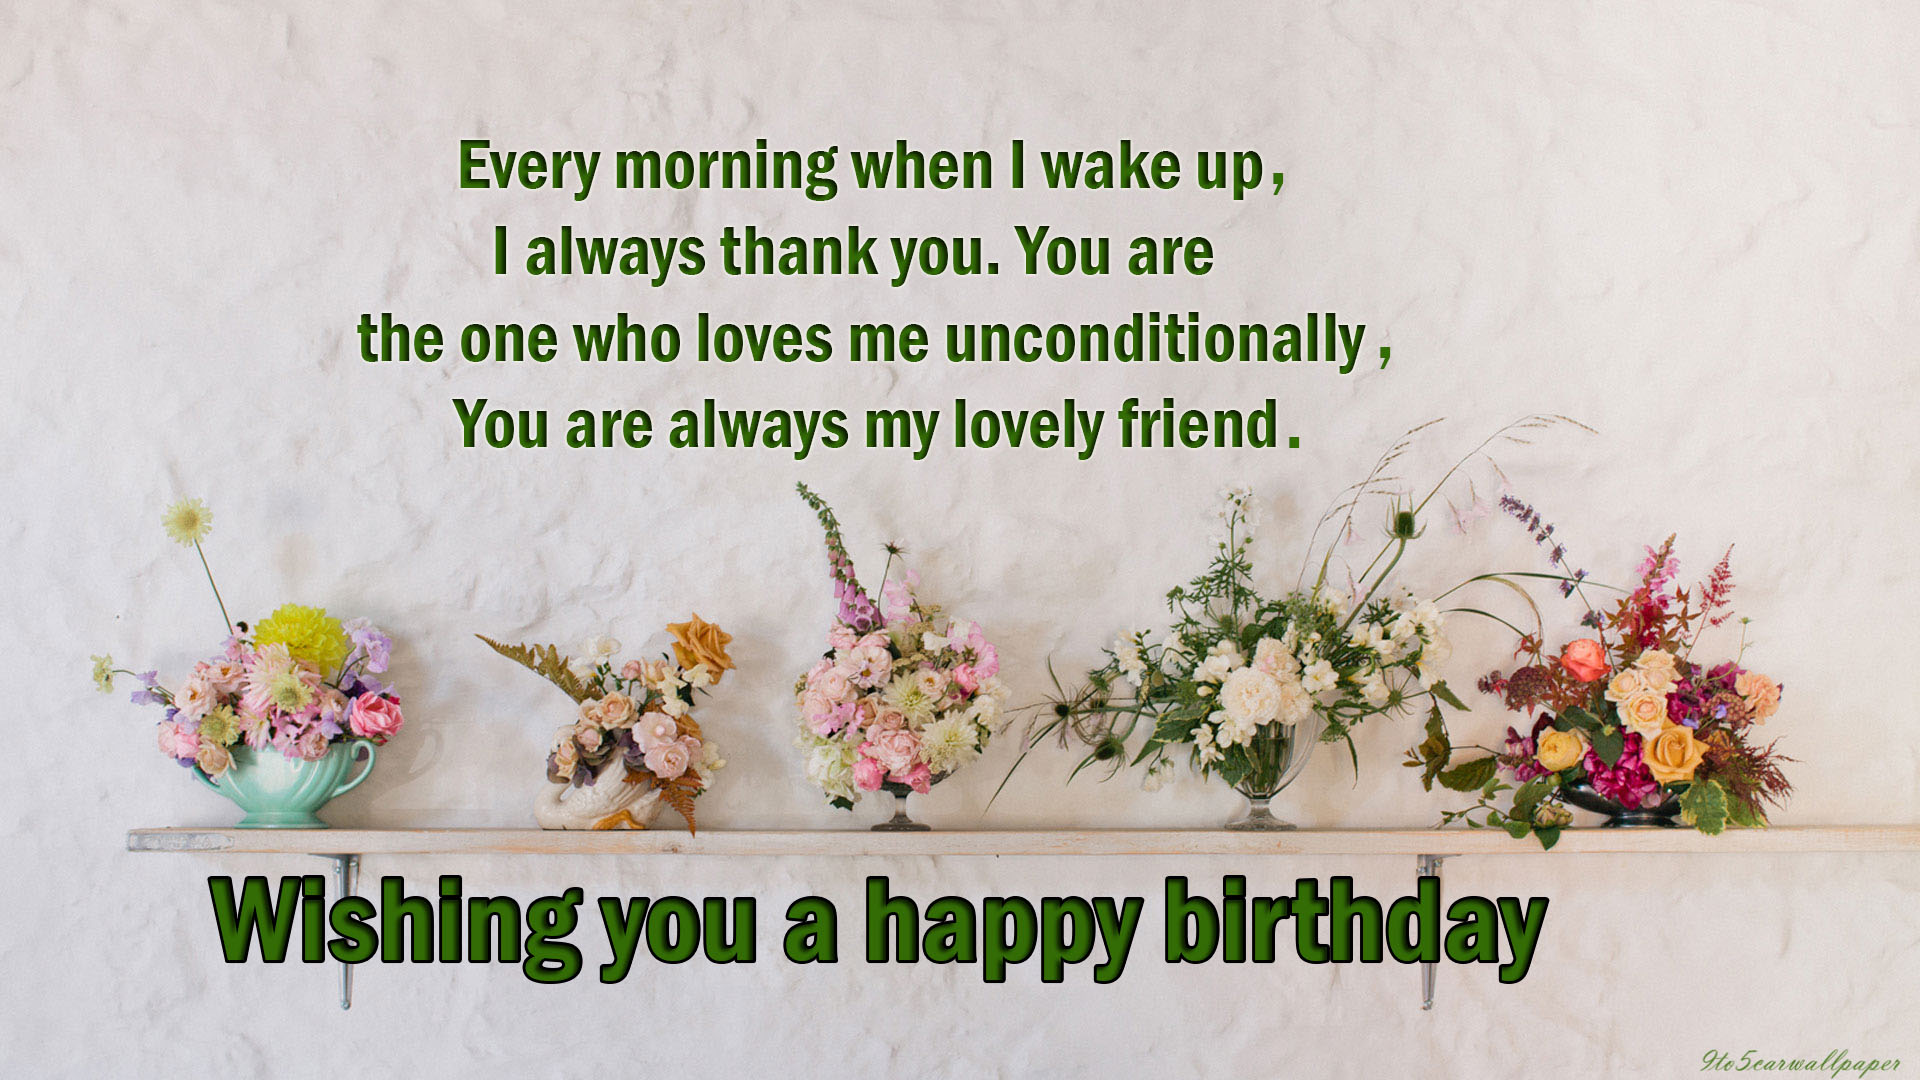 happy-birthday-wishes-cards-quotes-wallpapers-2018